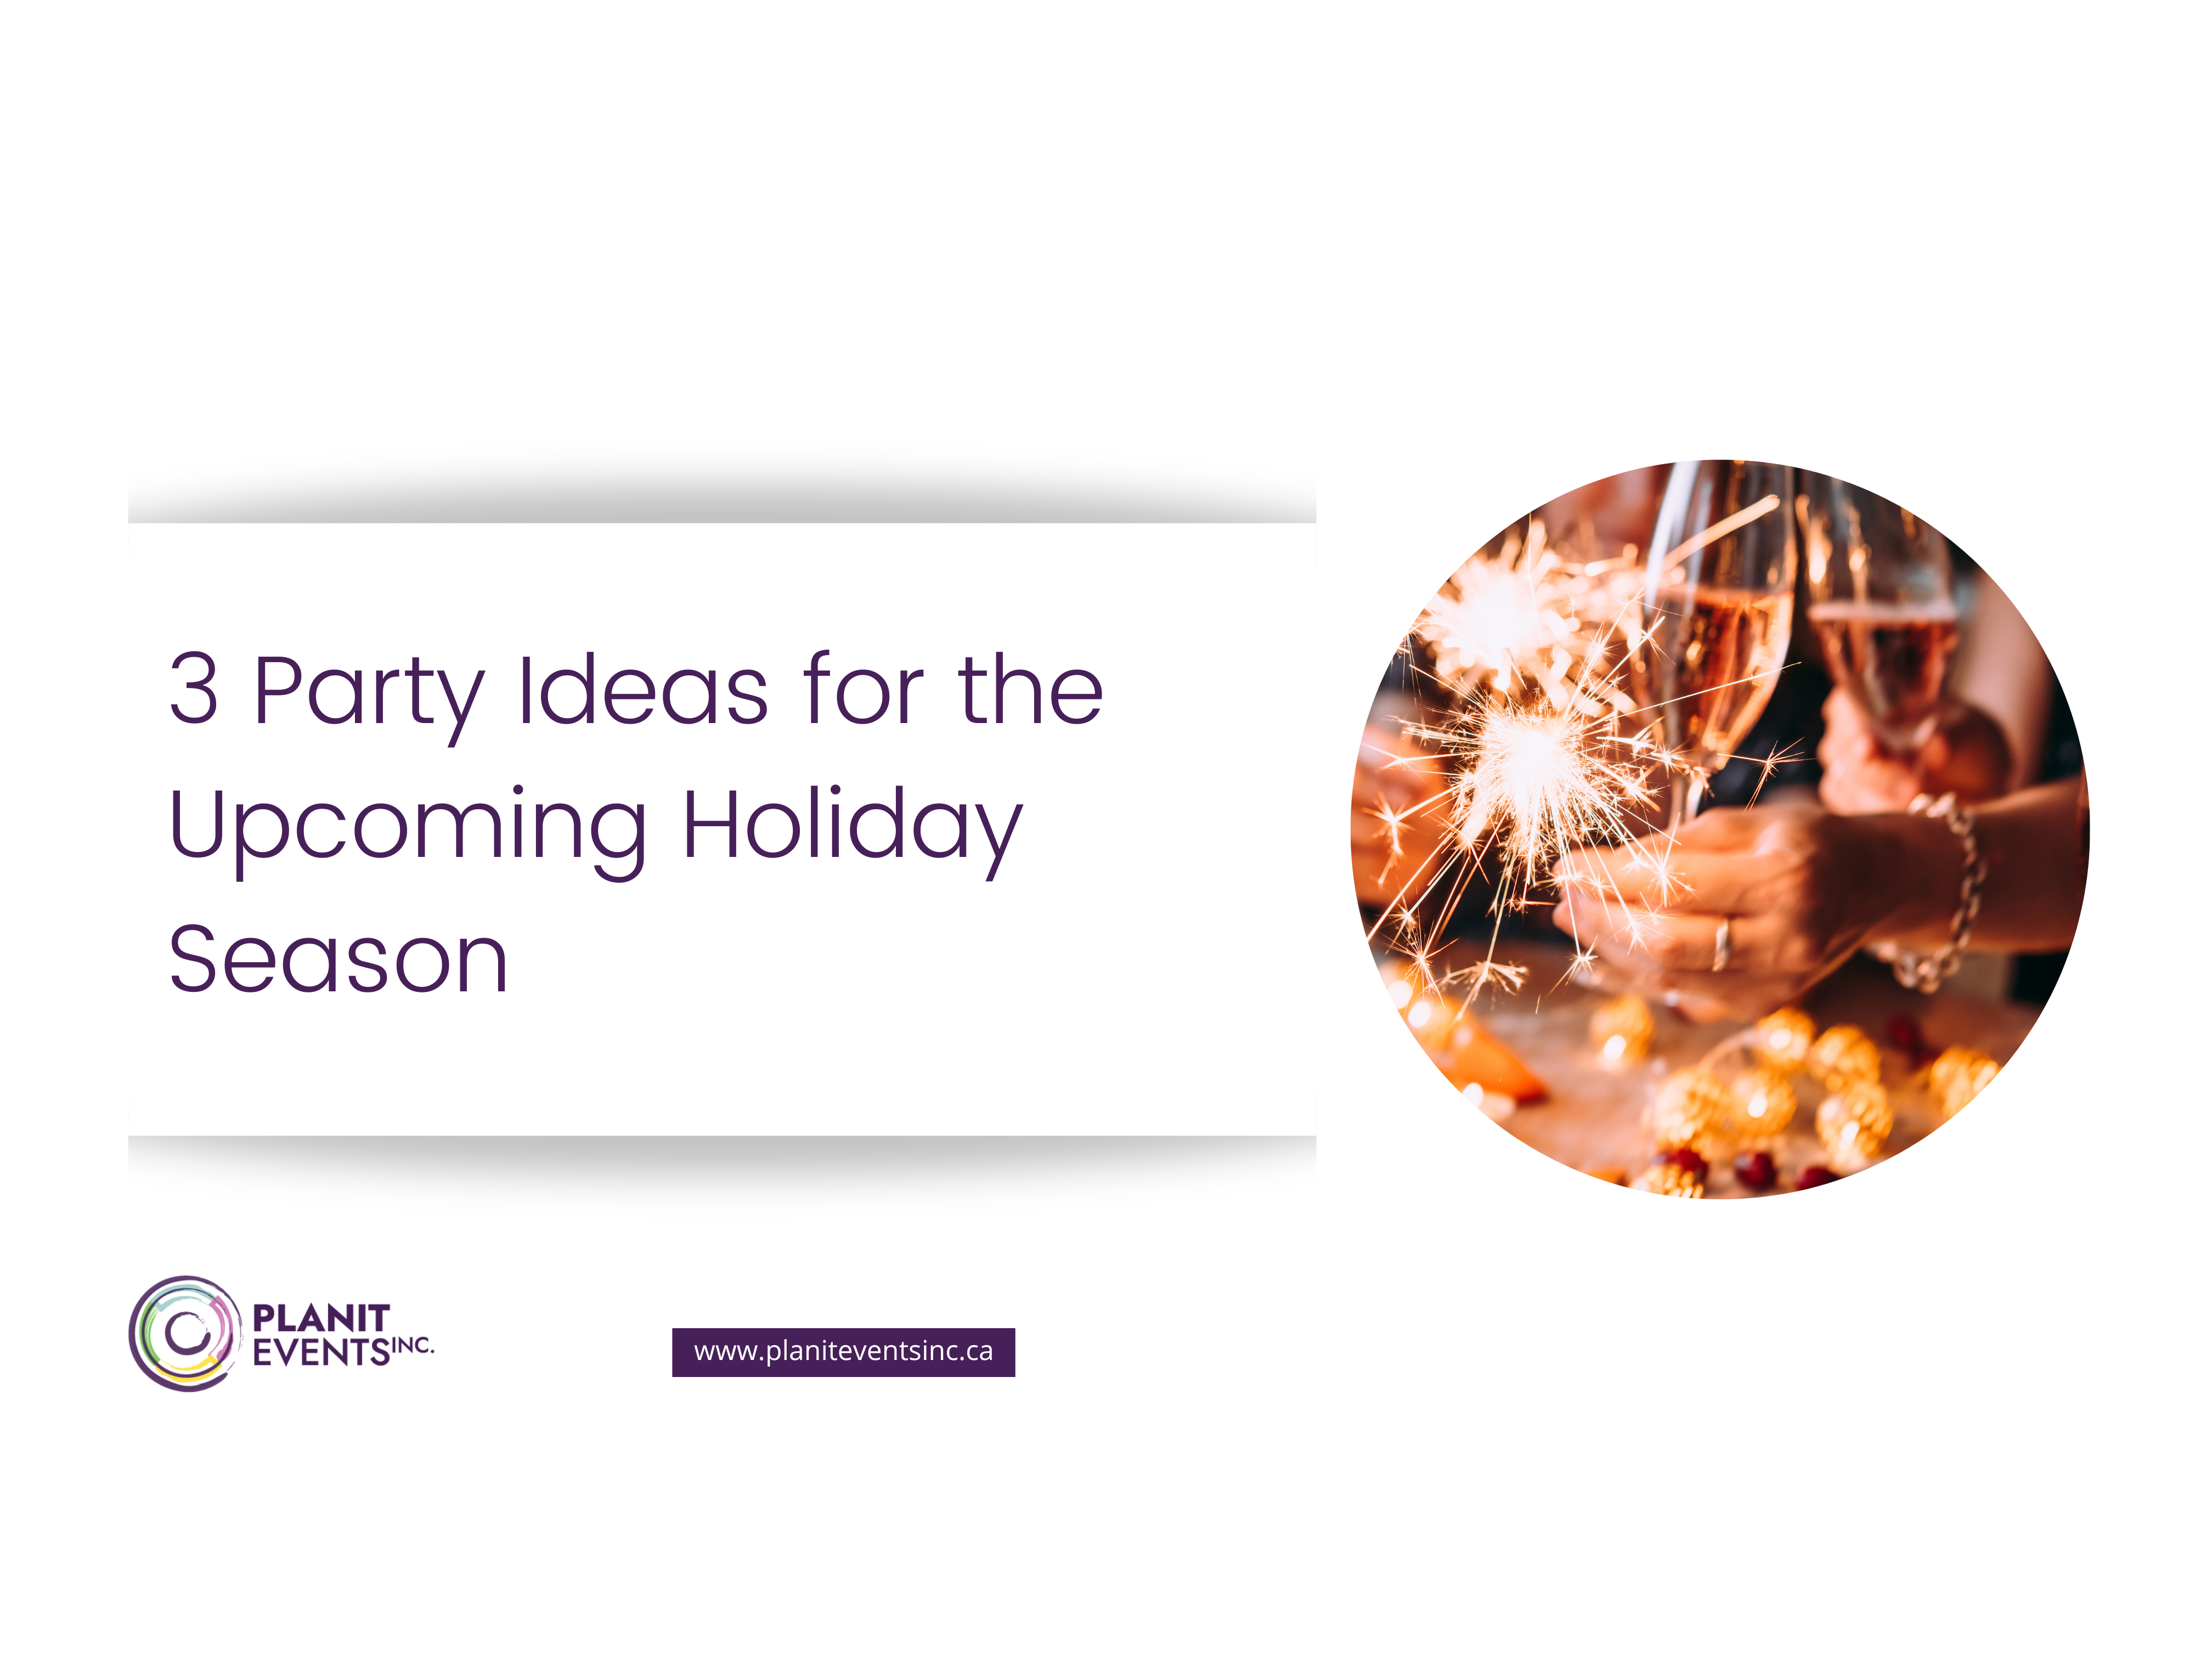 3 Party Ideas for the Upcoming Holiday Season